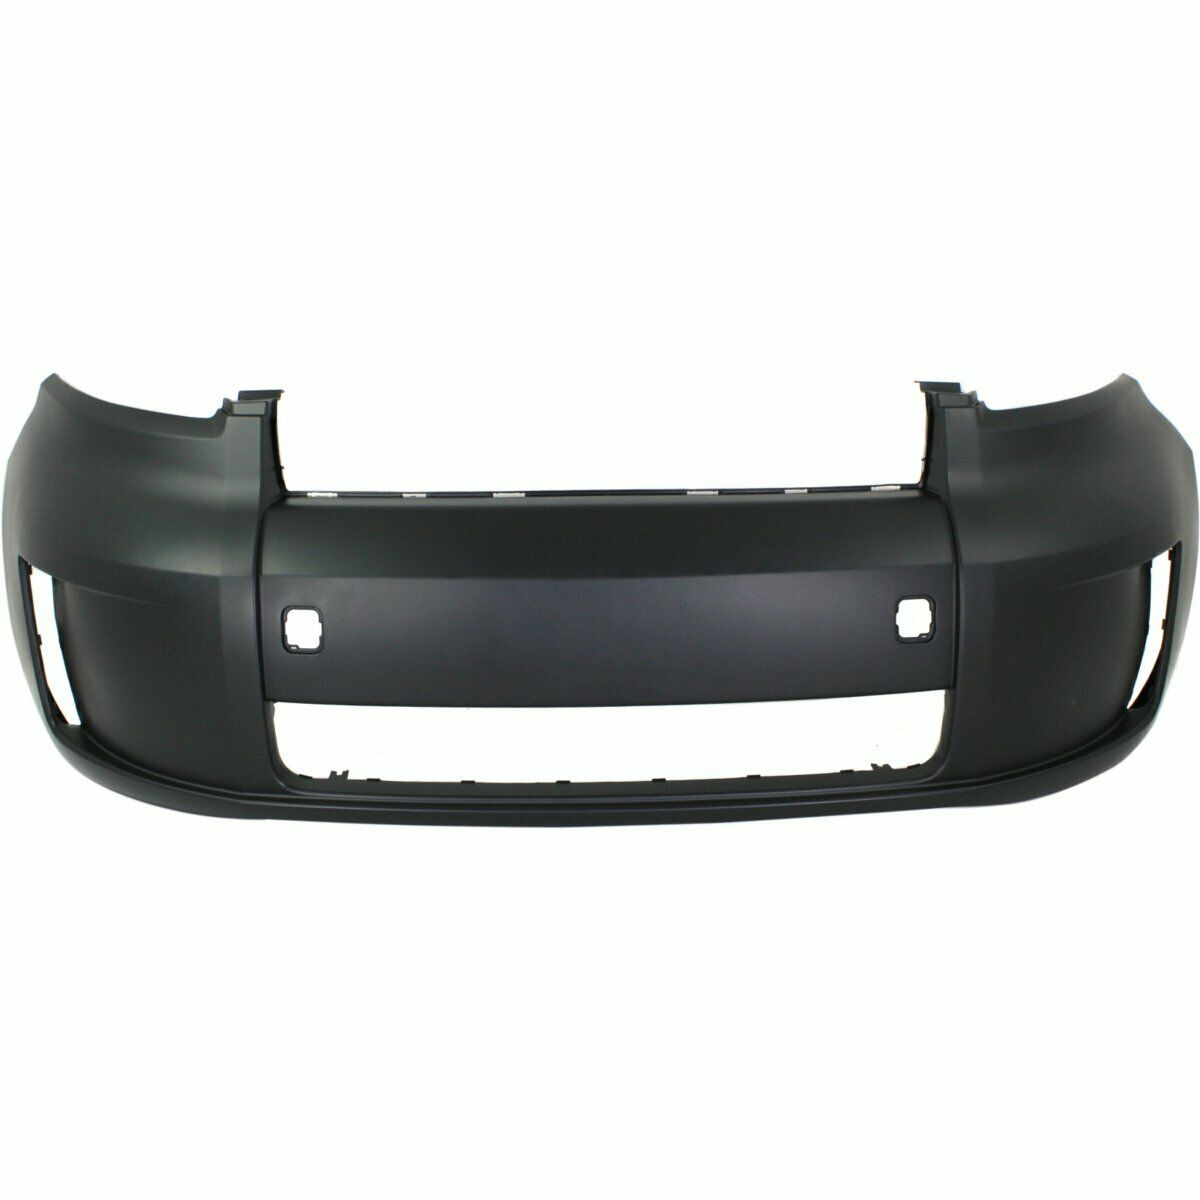 2008-2010 Scion XB Front Bumper with Fog Lamp Holes Painted to Match